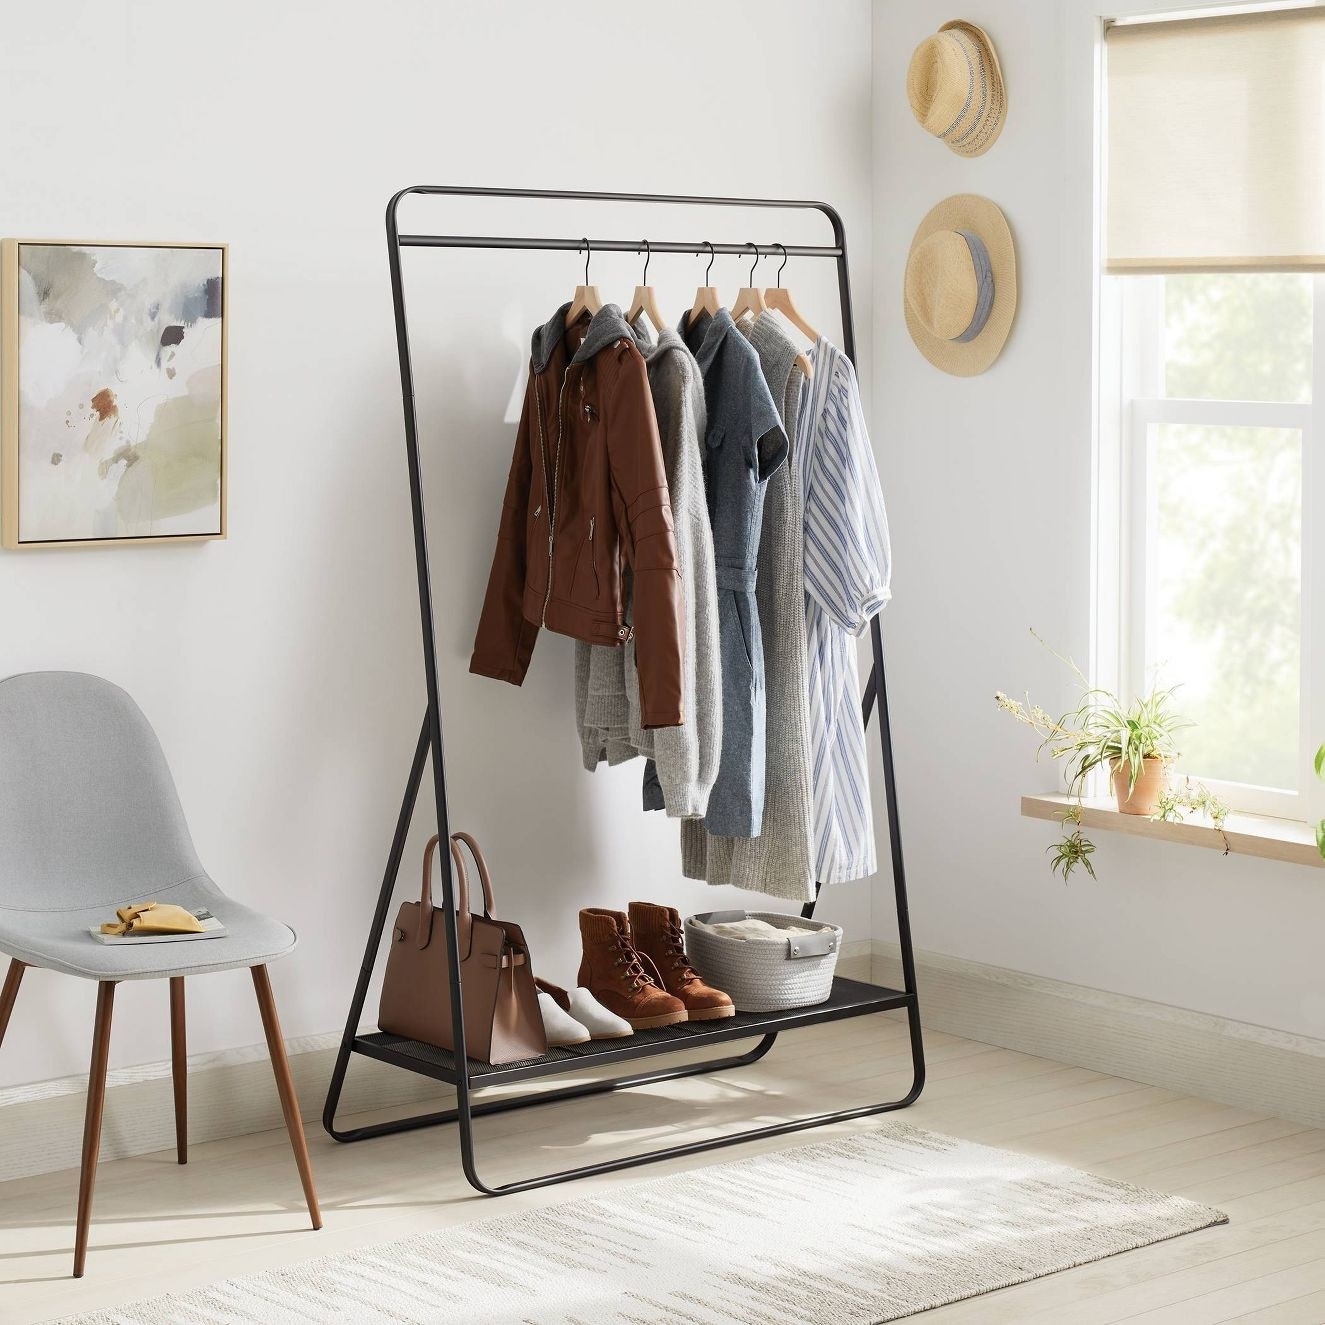 The garment rack with clothes and shoes